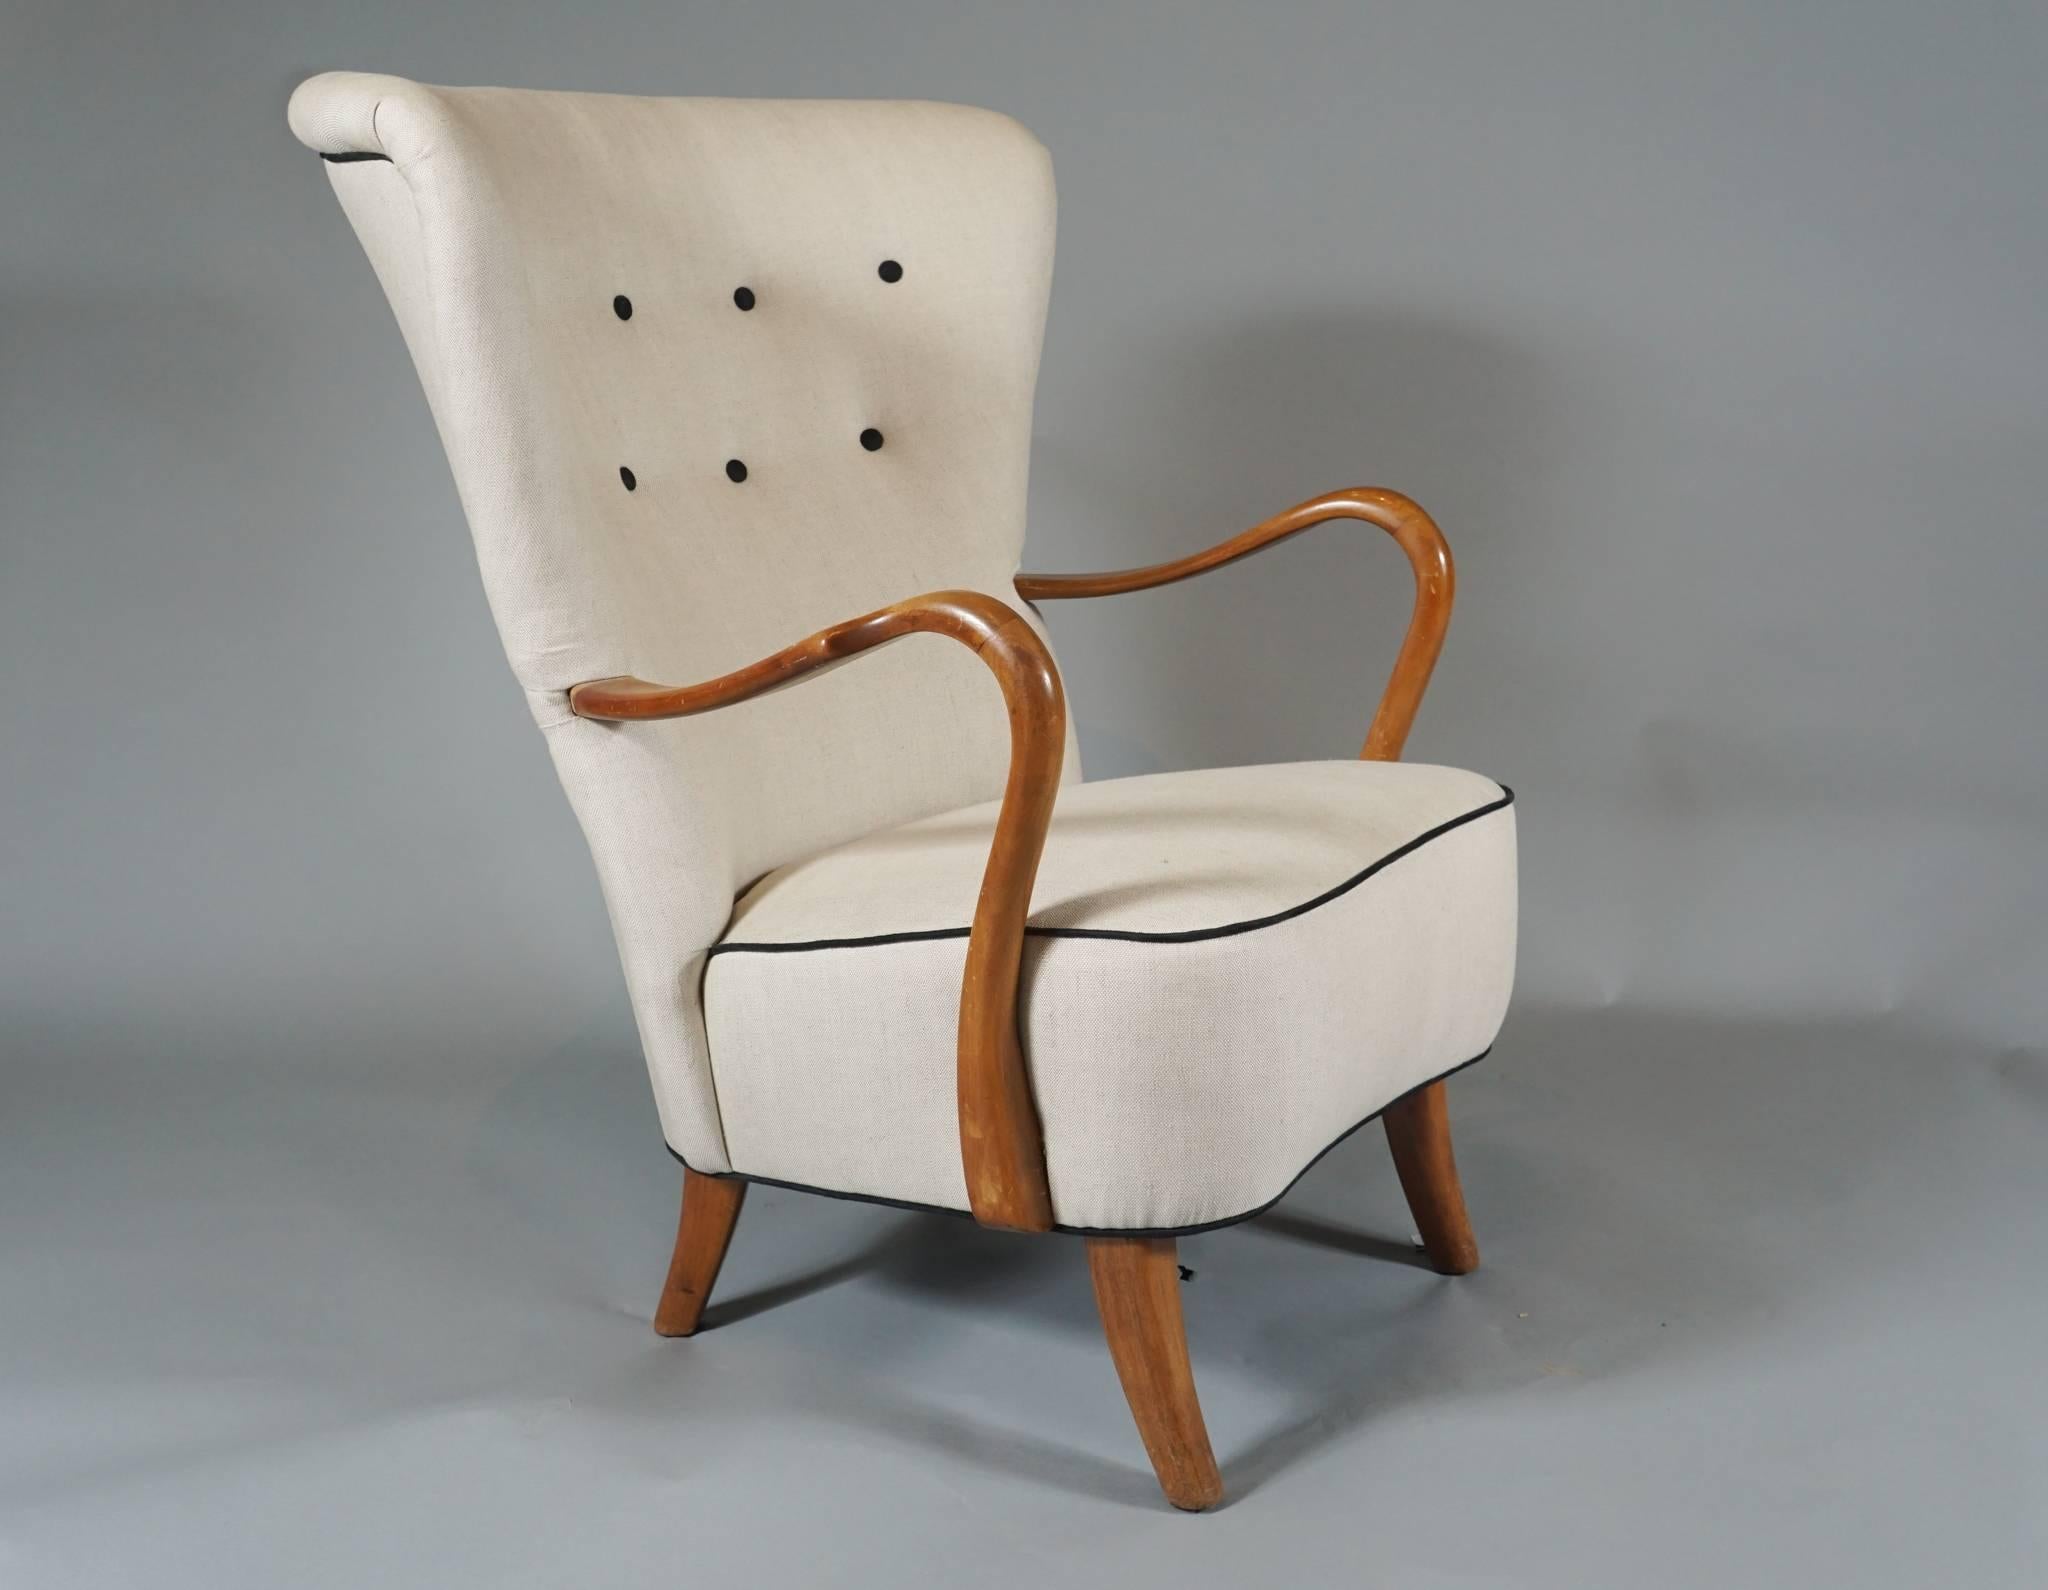 Large-scale 1940s open armchair by Danish cabinetmaker Alfred Christensen, upholstered in linen with black piping and buttons. The frame of beechwood. Note: We have similar chairs available if a pair is required.